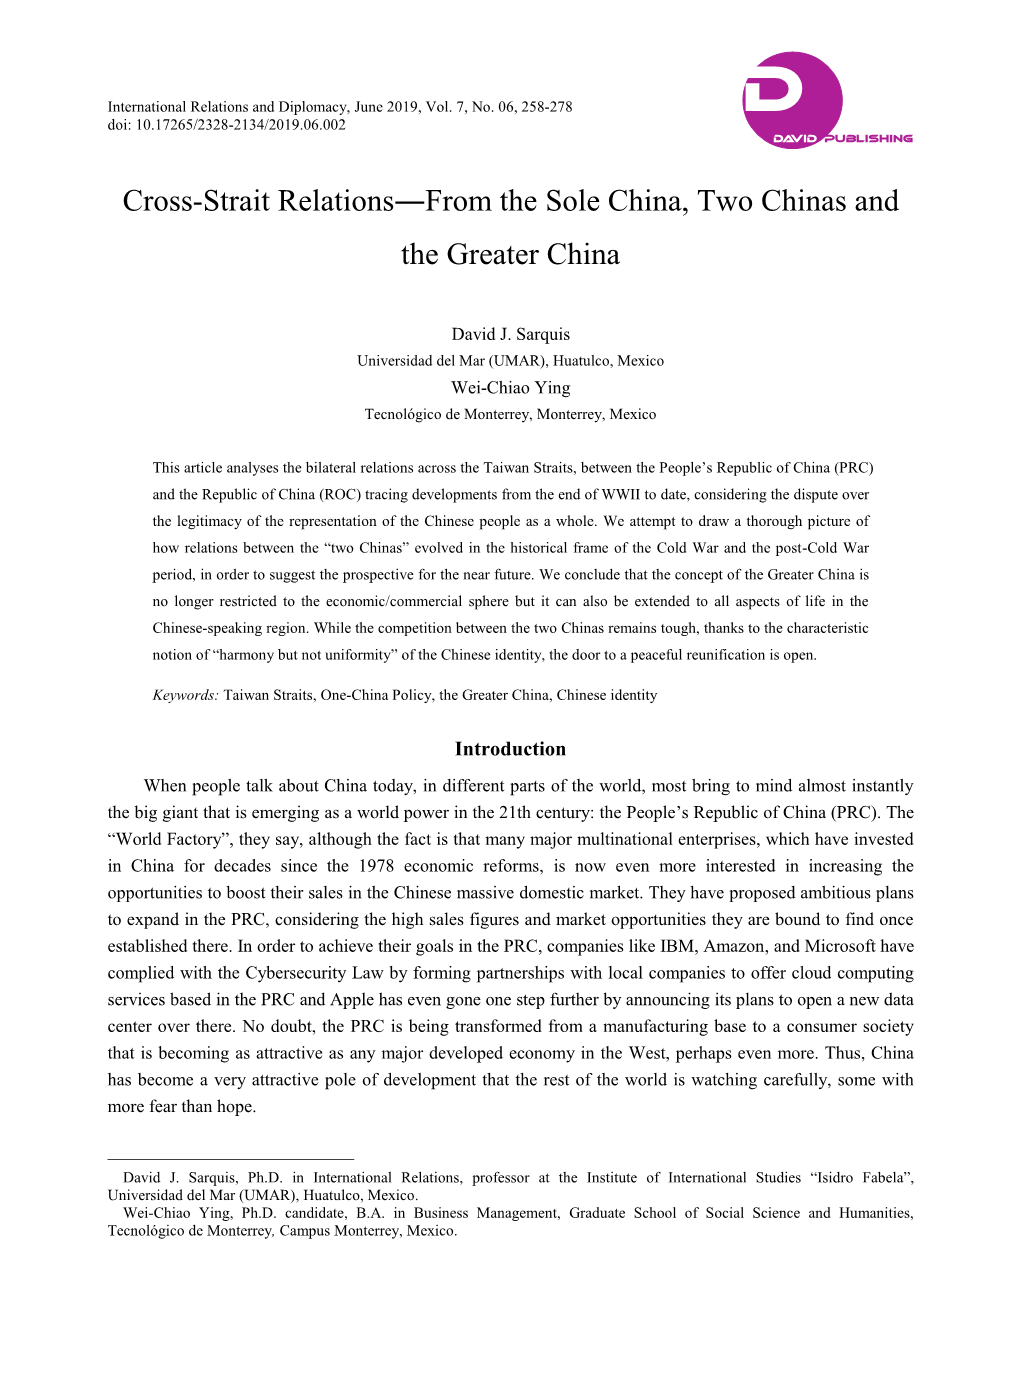 Cross-Strait Relations―From the Sole China, Two Chinas and the Greater China